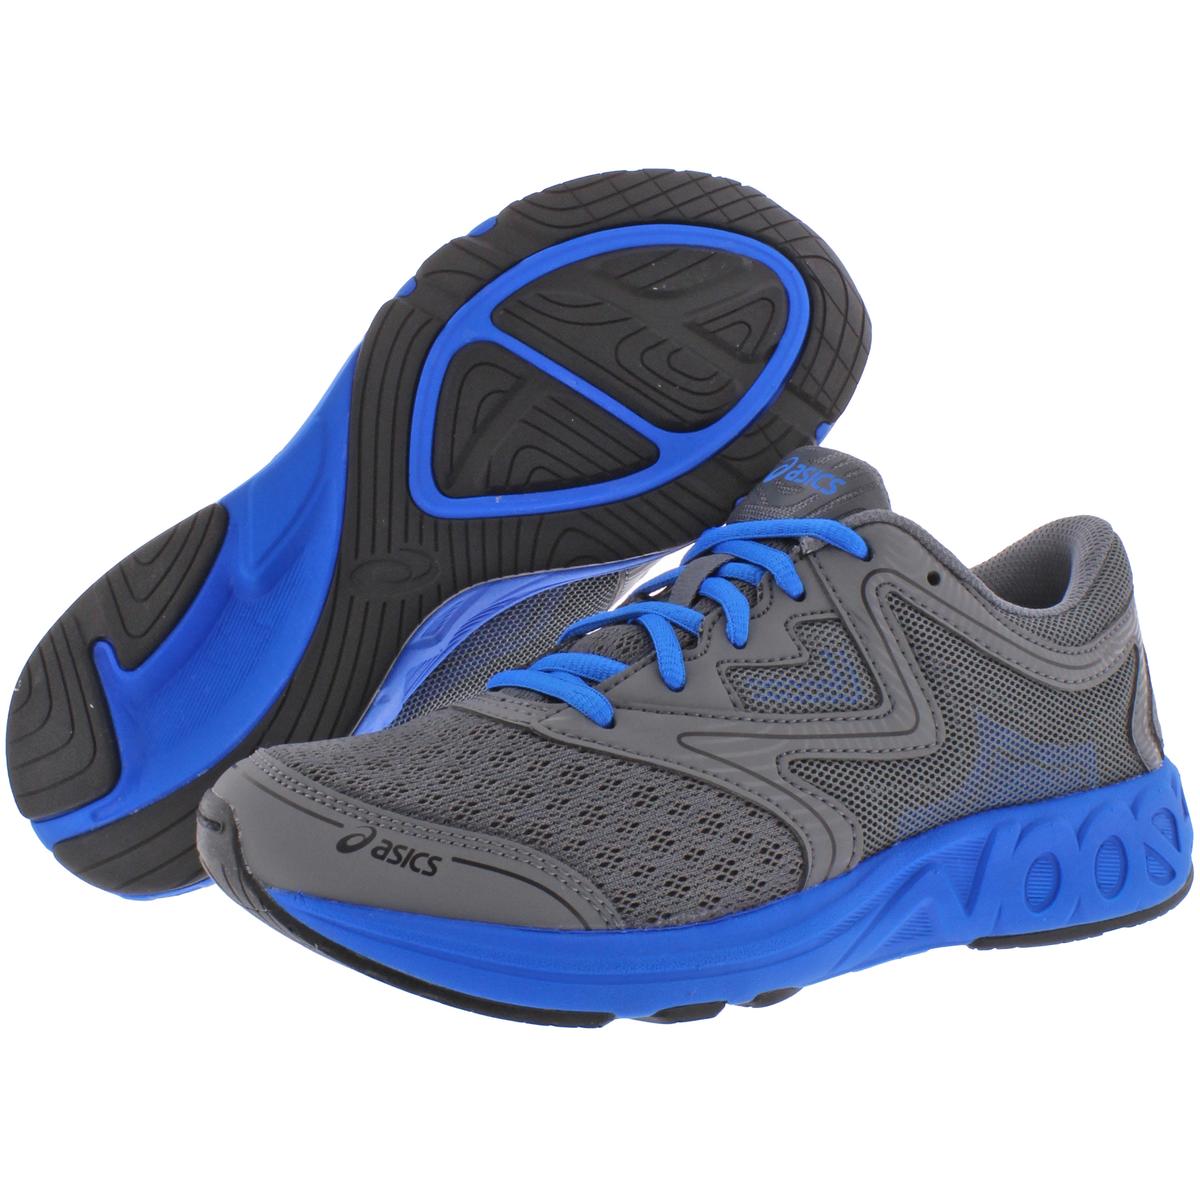 Asics Girls Noosa Lifestyle Sport Trainers Running Shoes Sneakers BHFO ...